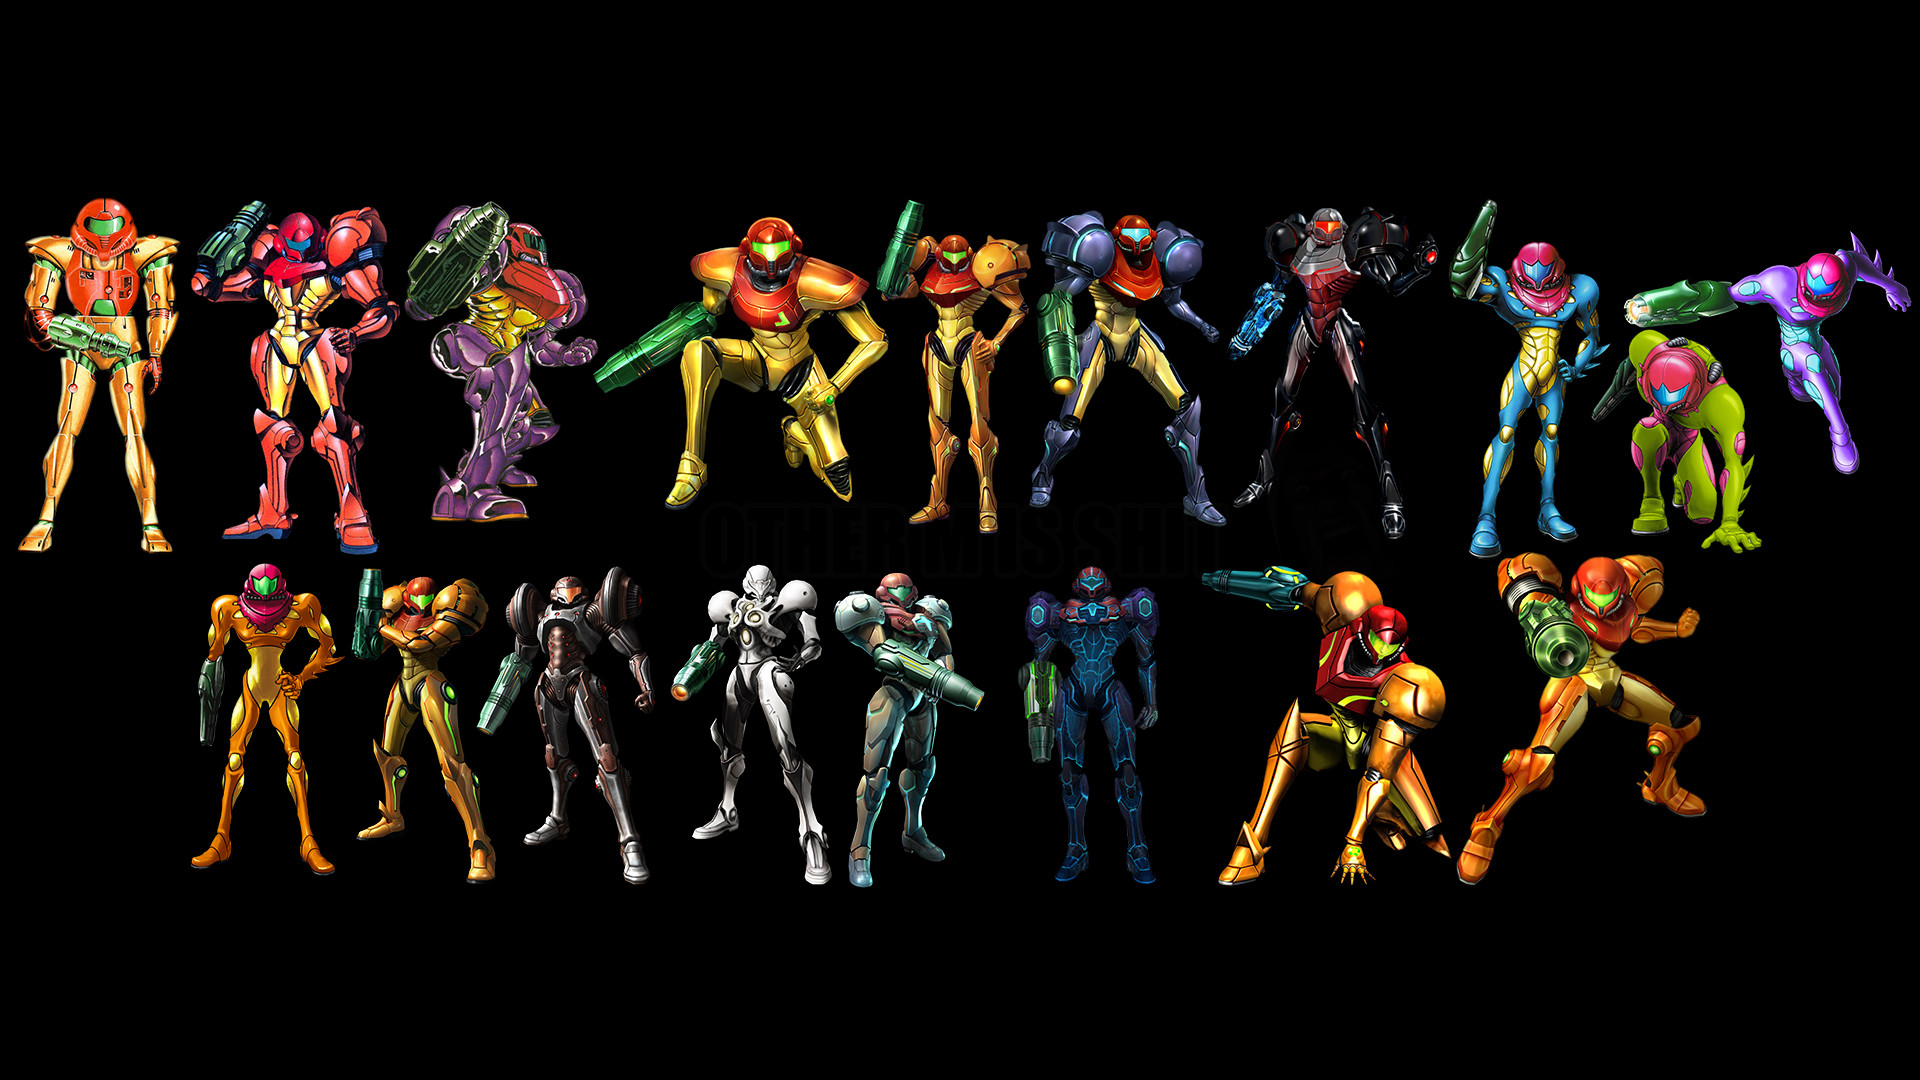 1920x1080 Who is your favorite metroid, funnyjunk?